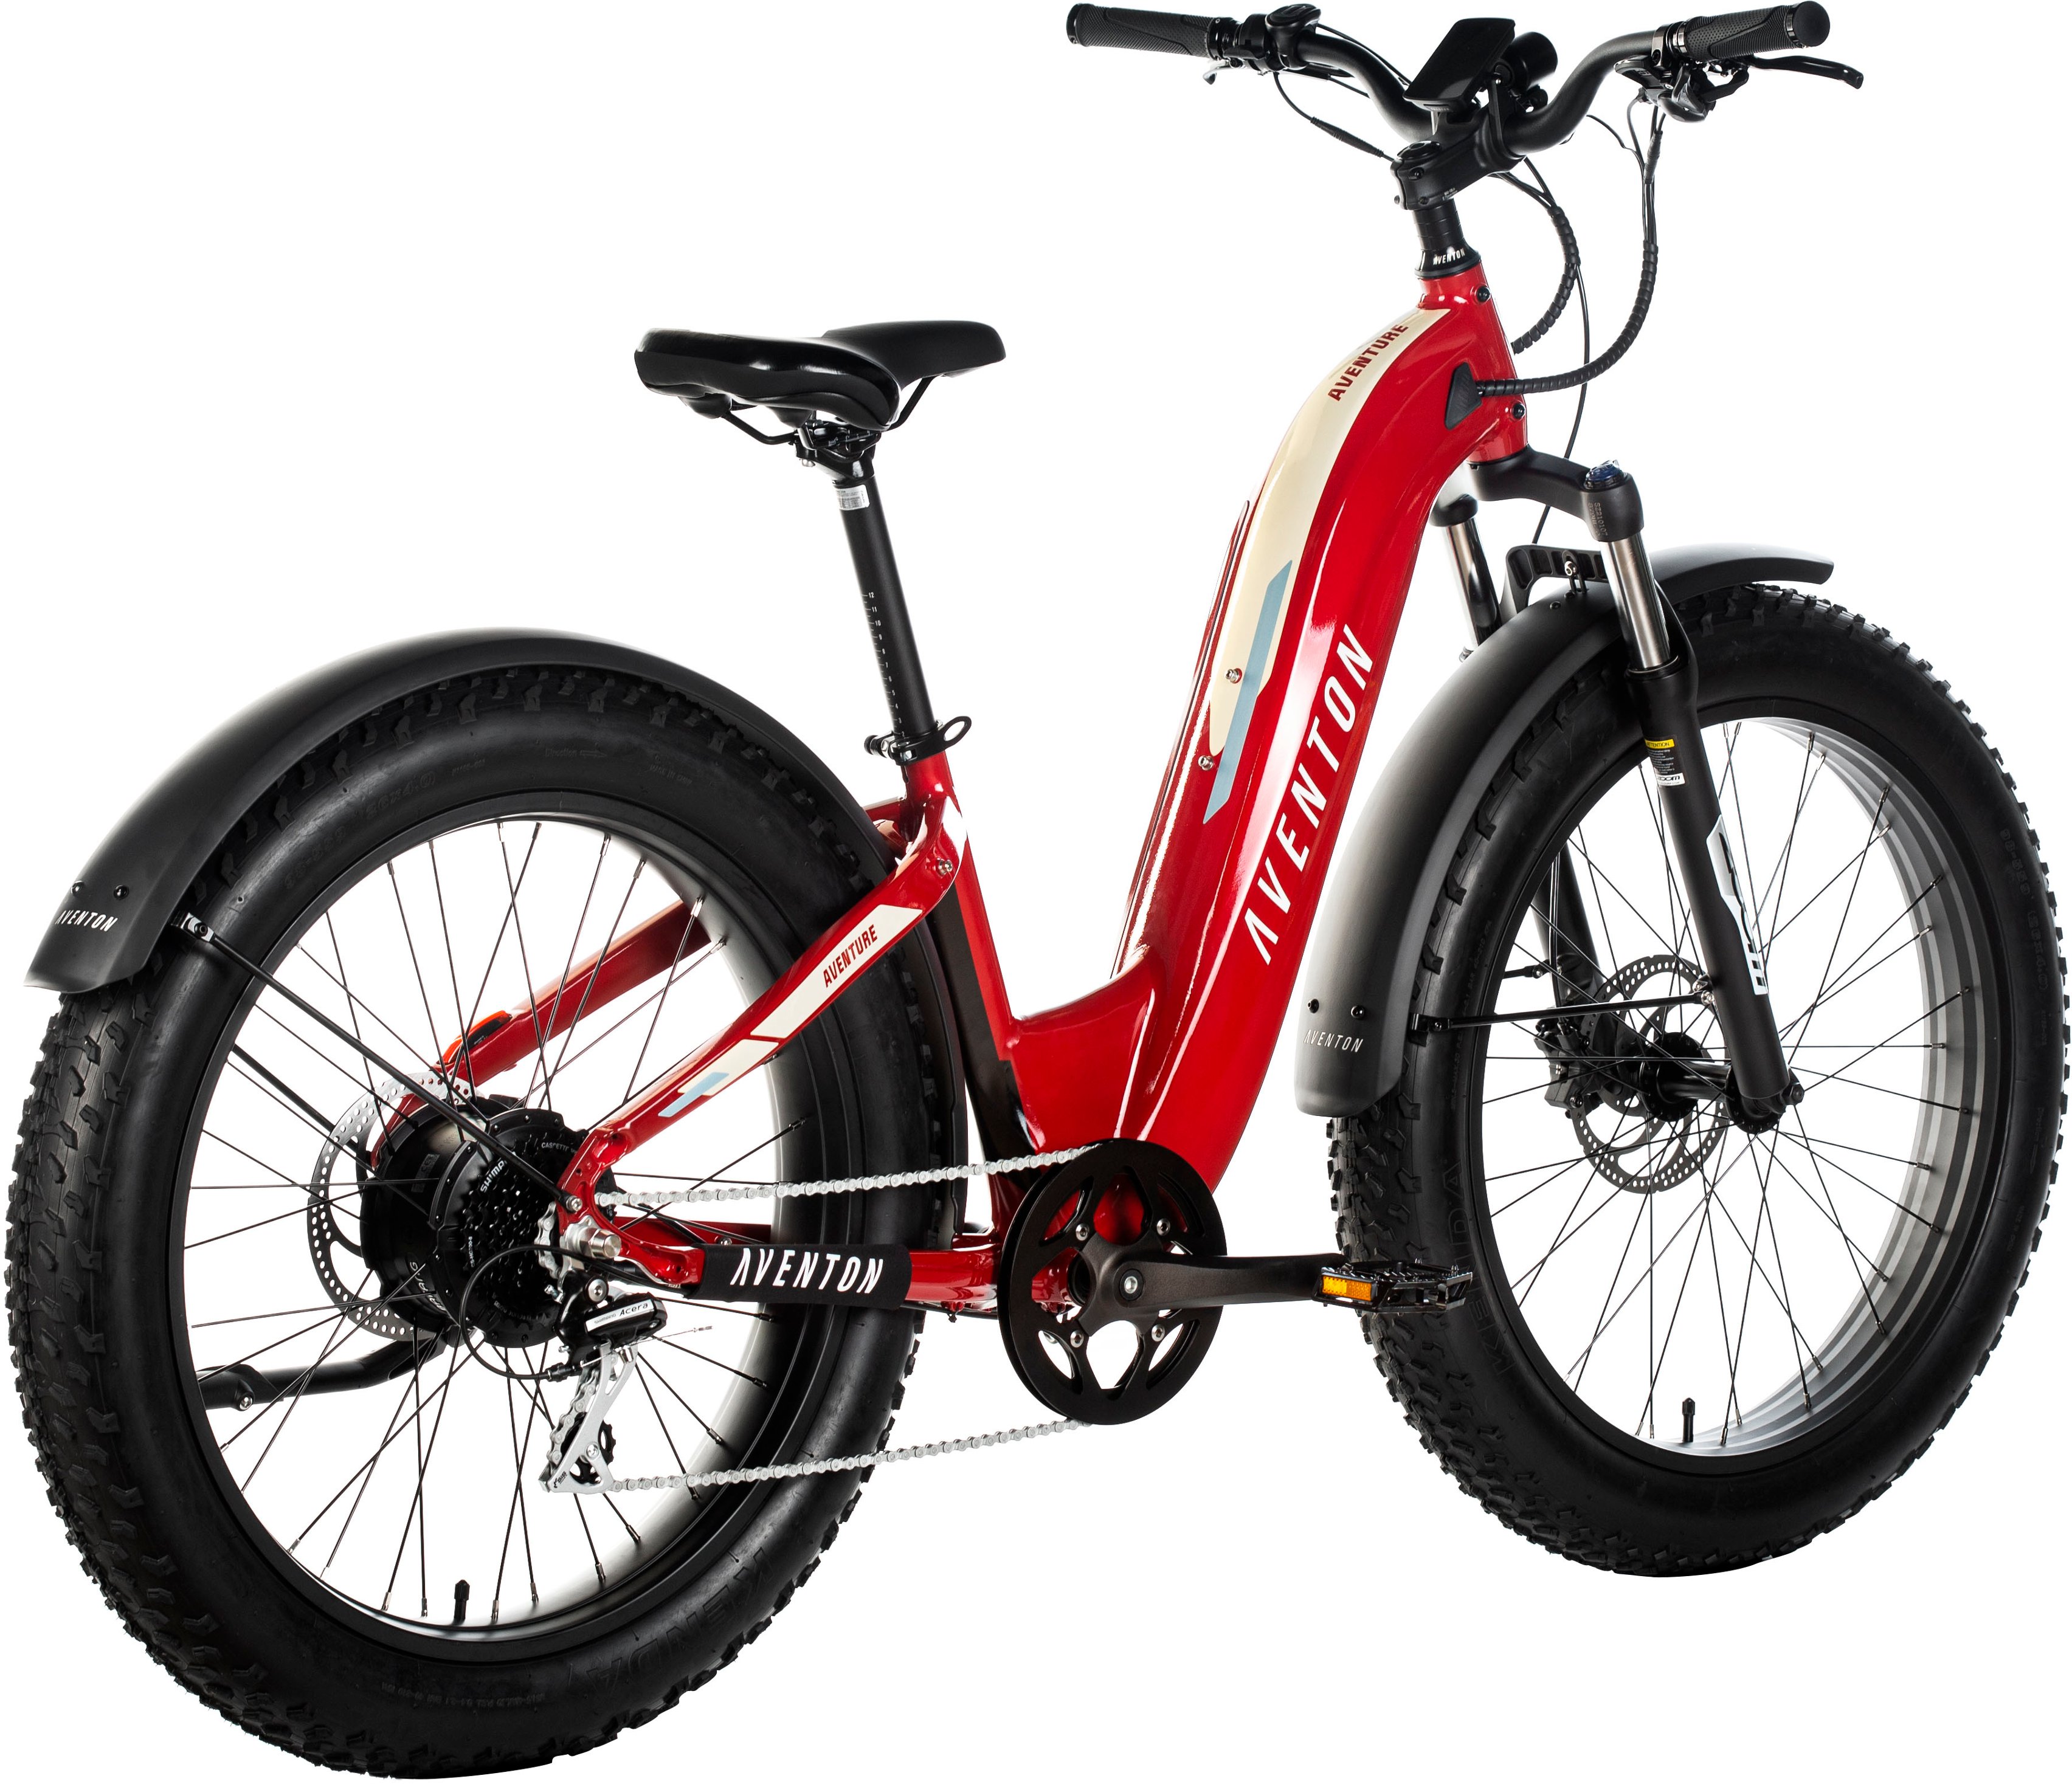 Angle View: Razor MX650 Dirt Rocket 36V Electric Ride-on Dirt Bike Adult/Teen, Height 34" Product Weight 100 lb